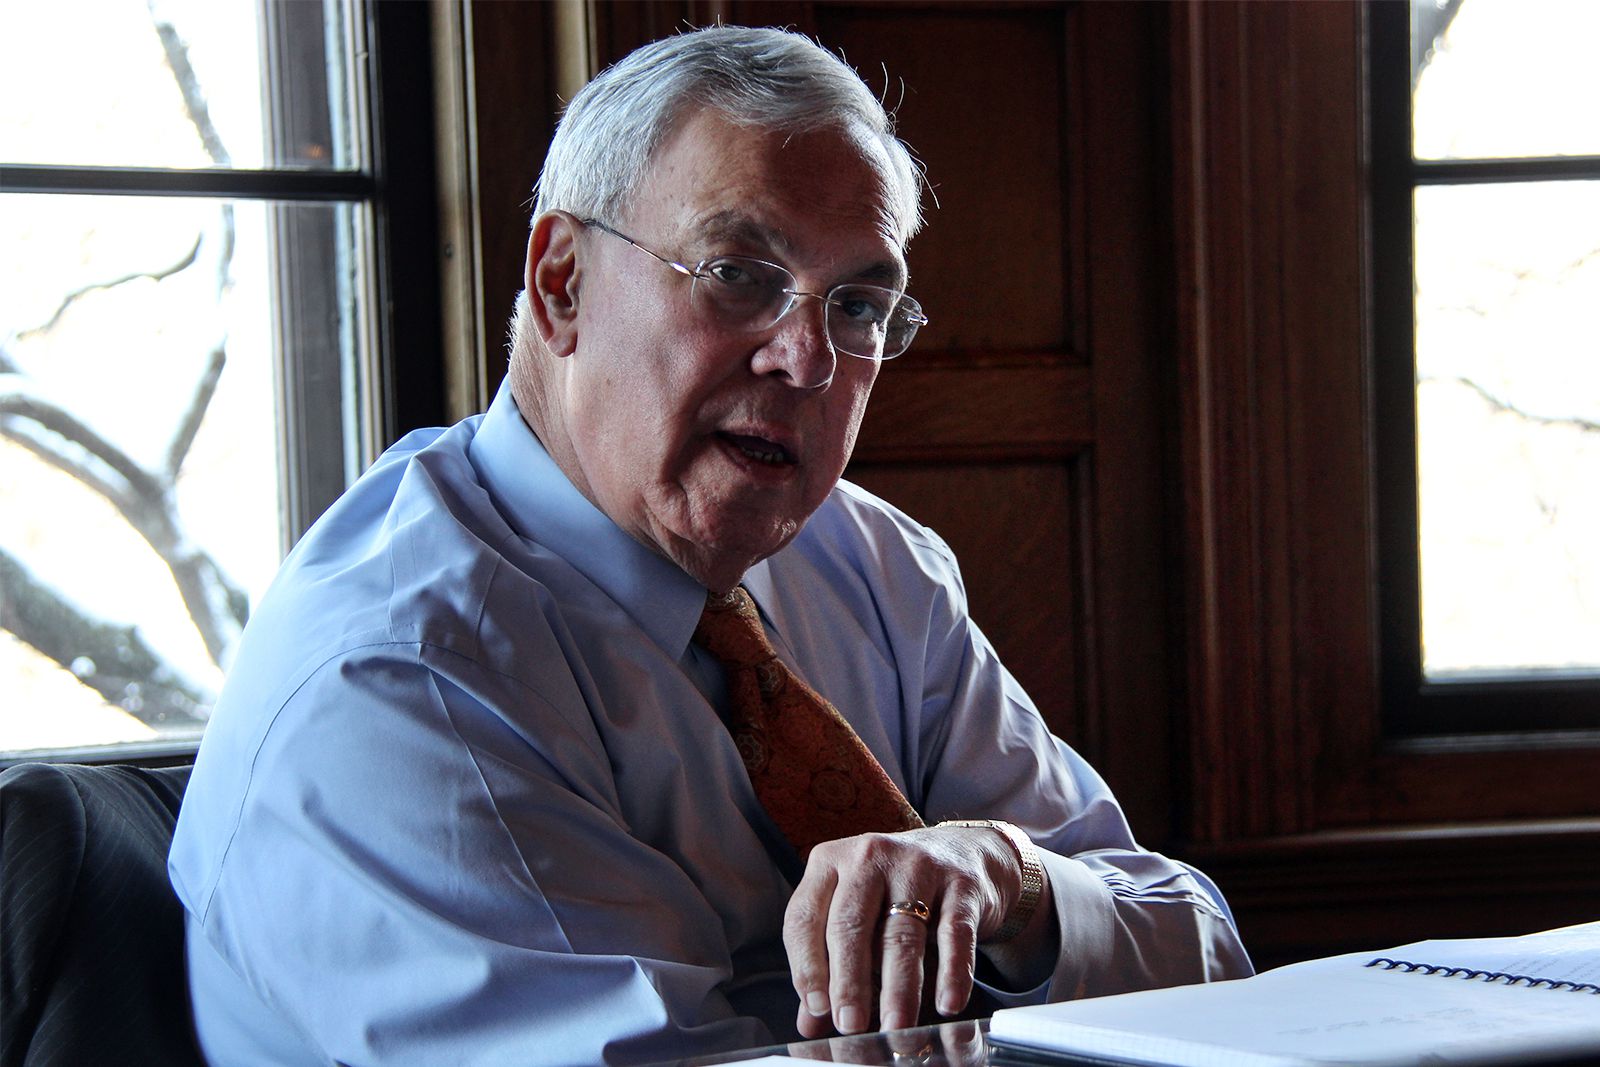 Former Boston Mayor Thomas Menino has died Thursday at age 71 due to advanced cancer. He was also the co-director of the Initiative on Cities at Boston University. PHOTO BY ALEXANDRA WIMLEY/DAILY FREE PRESS STAFF